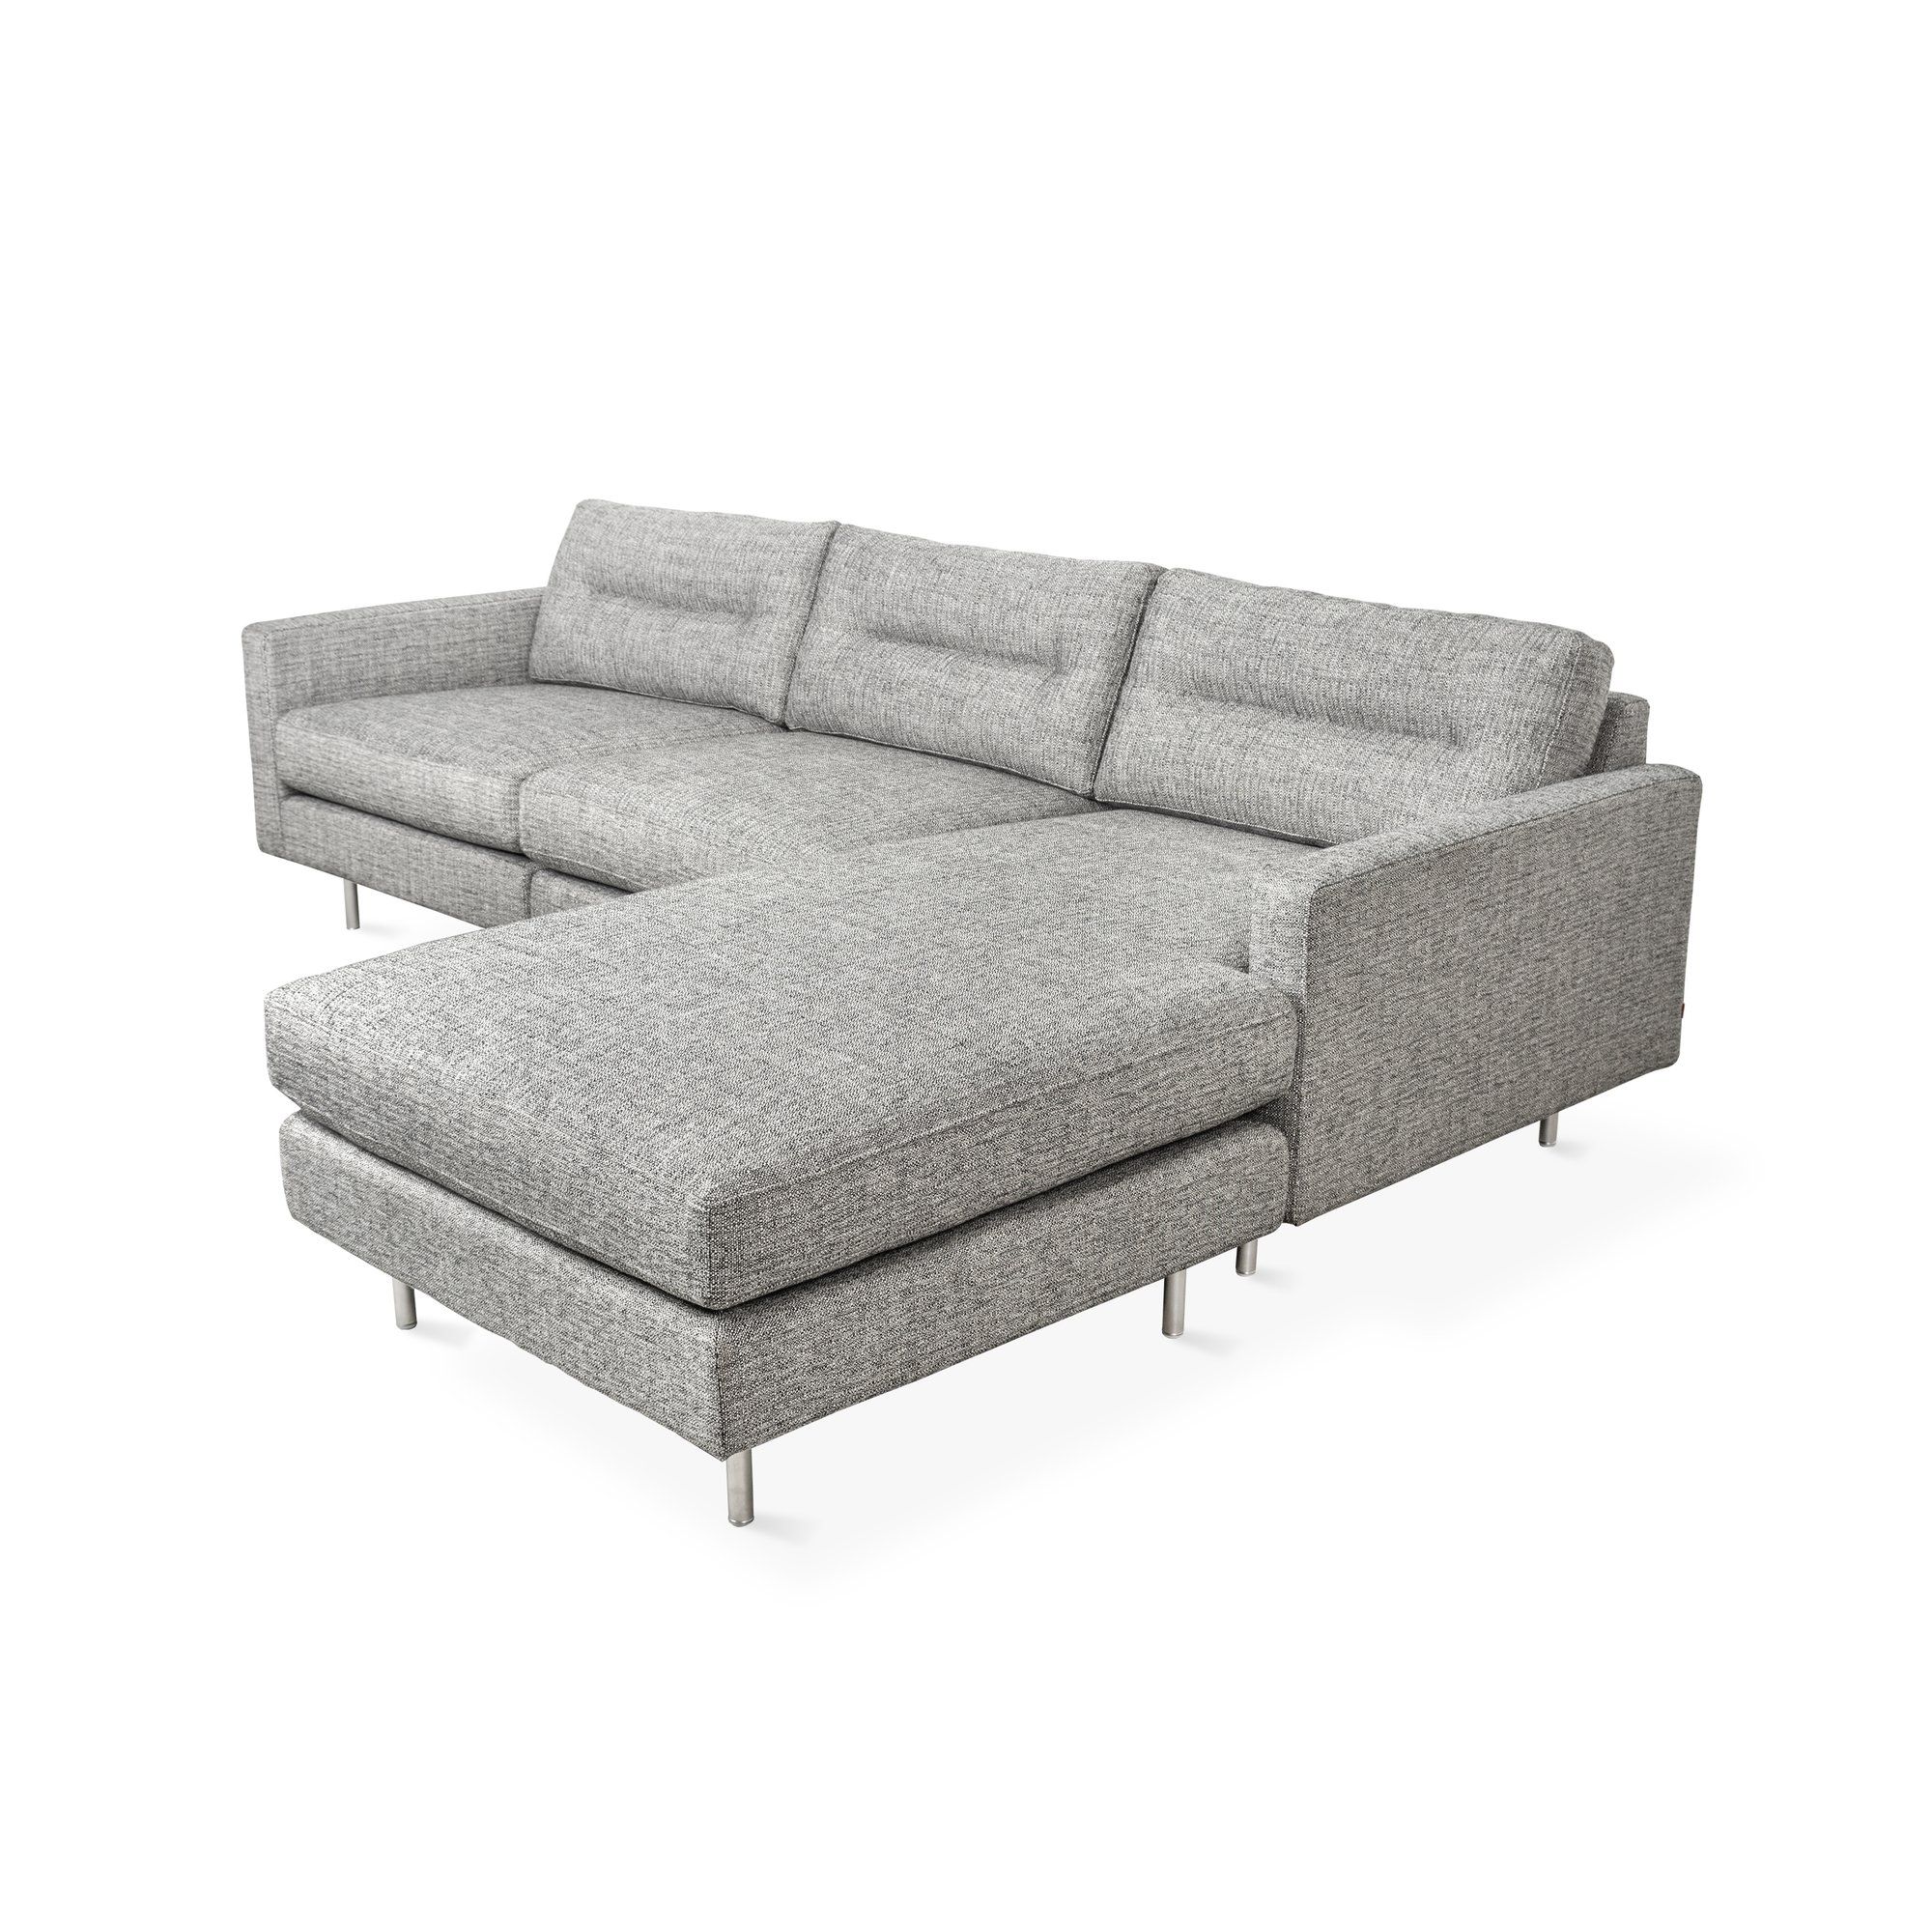 Logan Bi Sectional Reviews Allmodern With Bisectional Sofa (View 8 of 12)